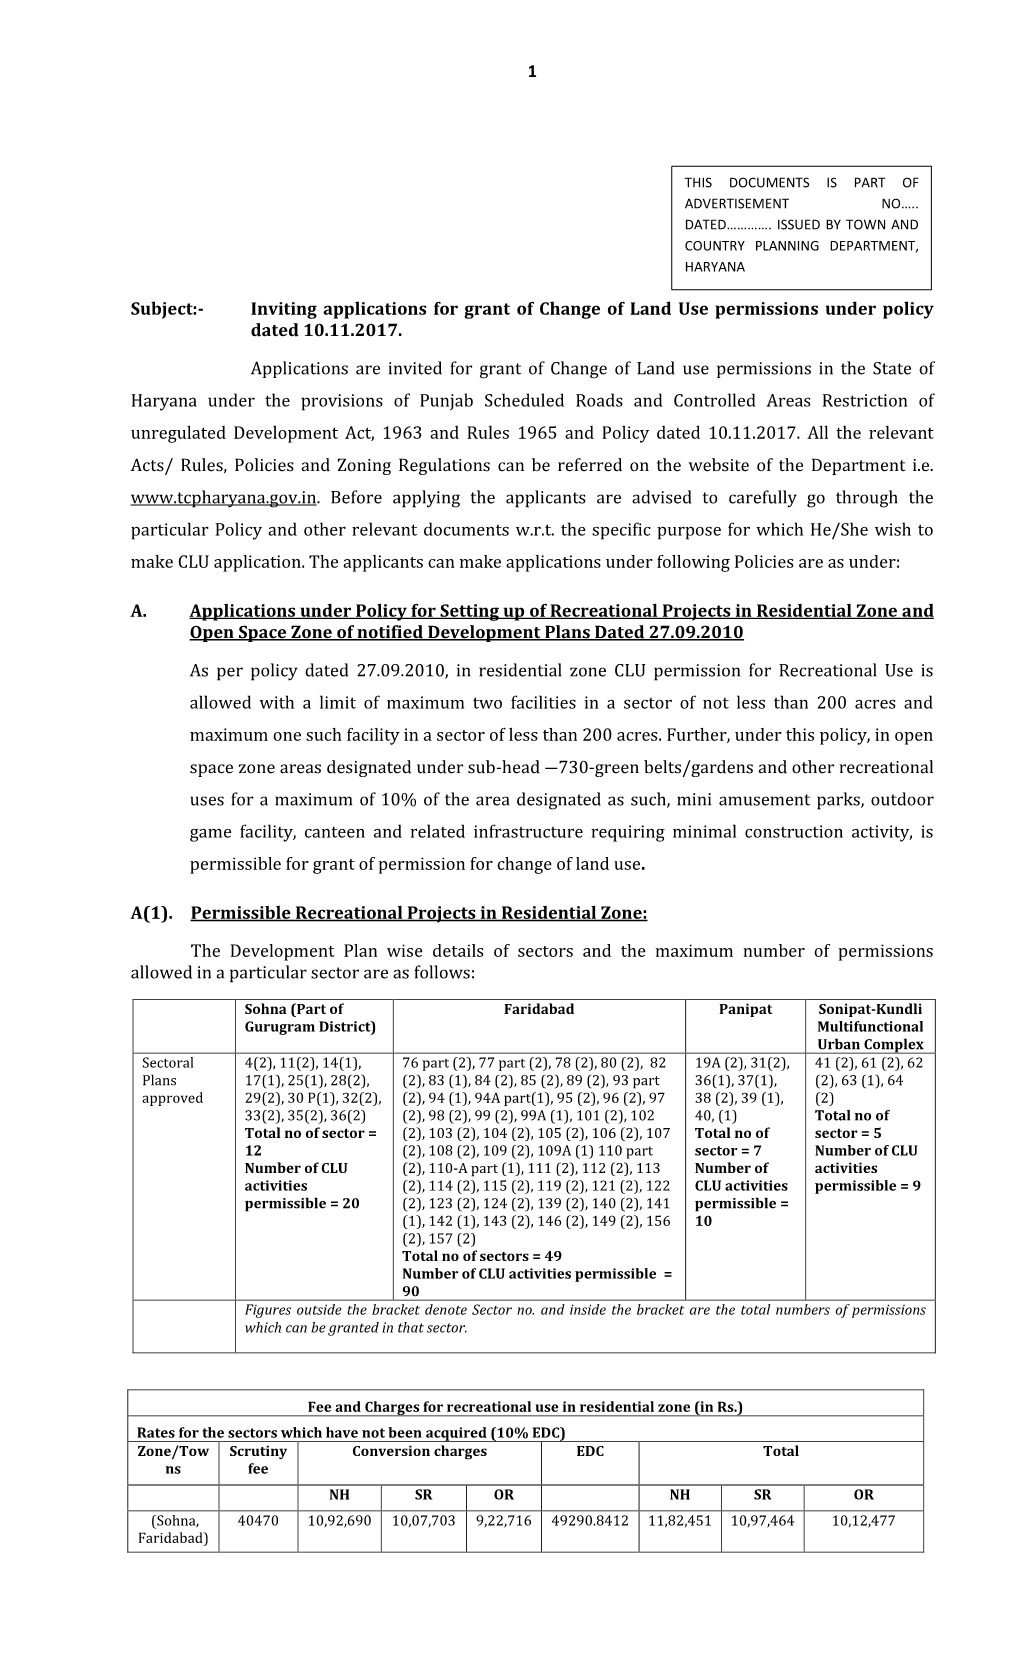 Inviting Applications for Grant of Change of Land Use Permissions Under Policy Dated 10.11.2017